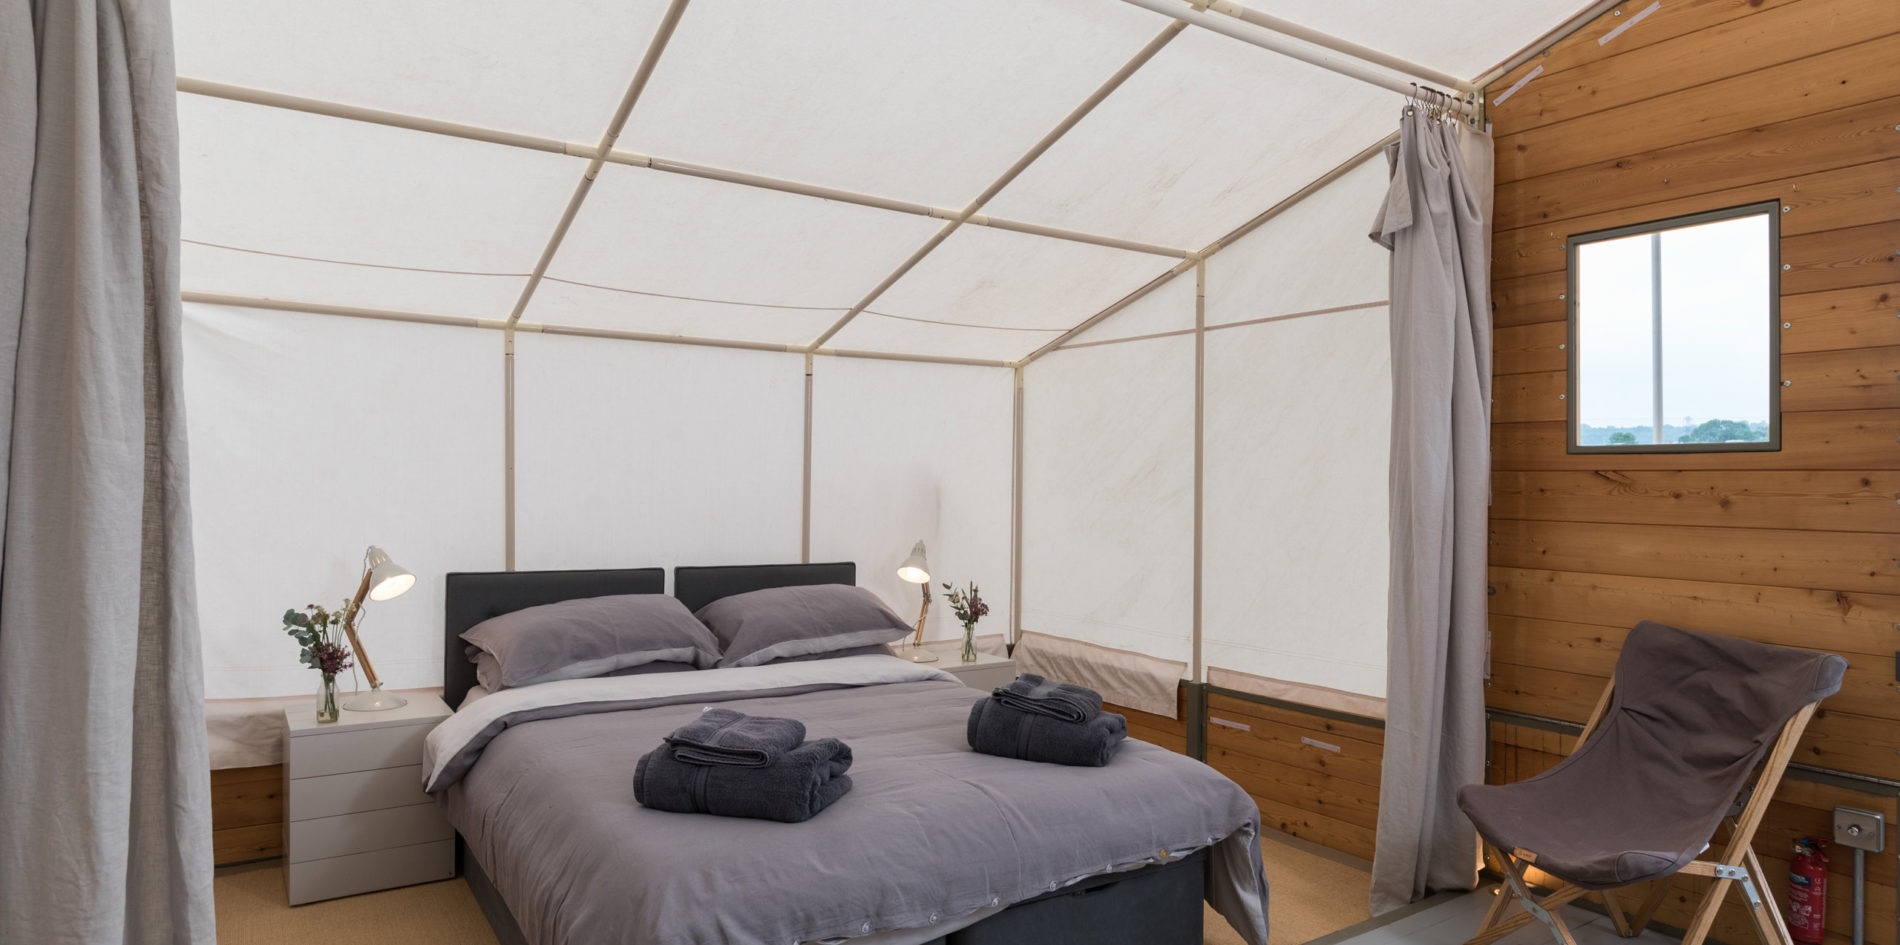 sleeping area details - luxury suite luxury camping accommodation